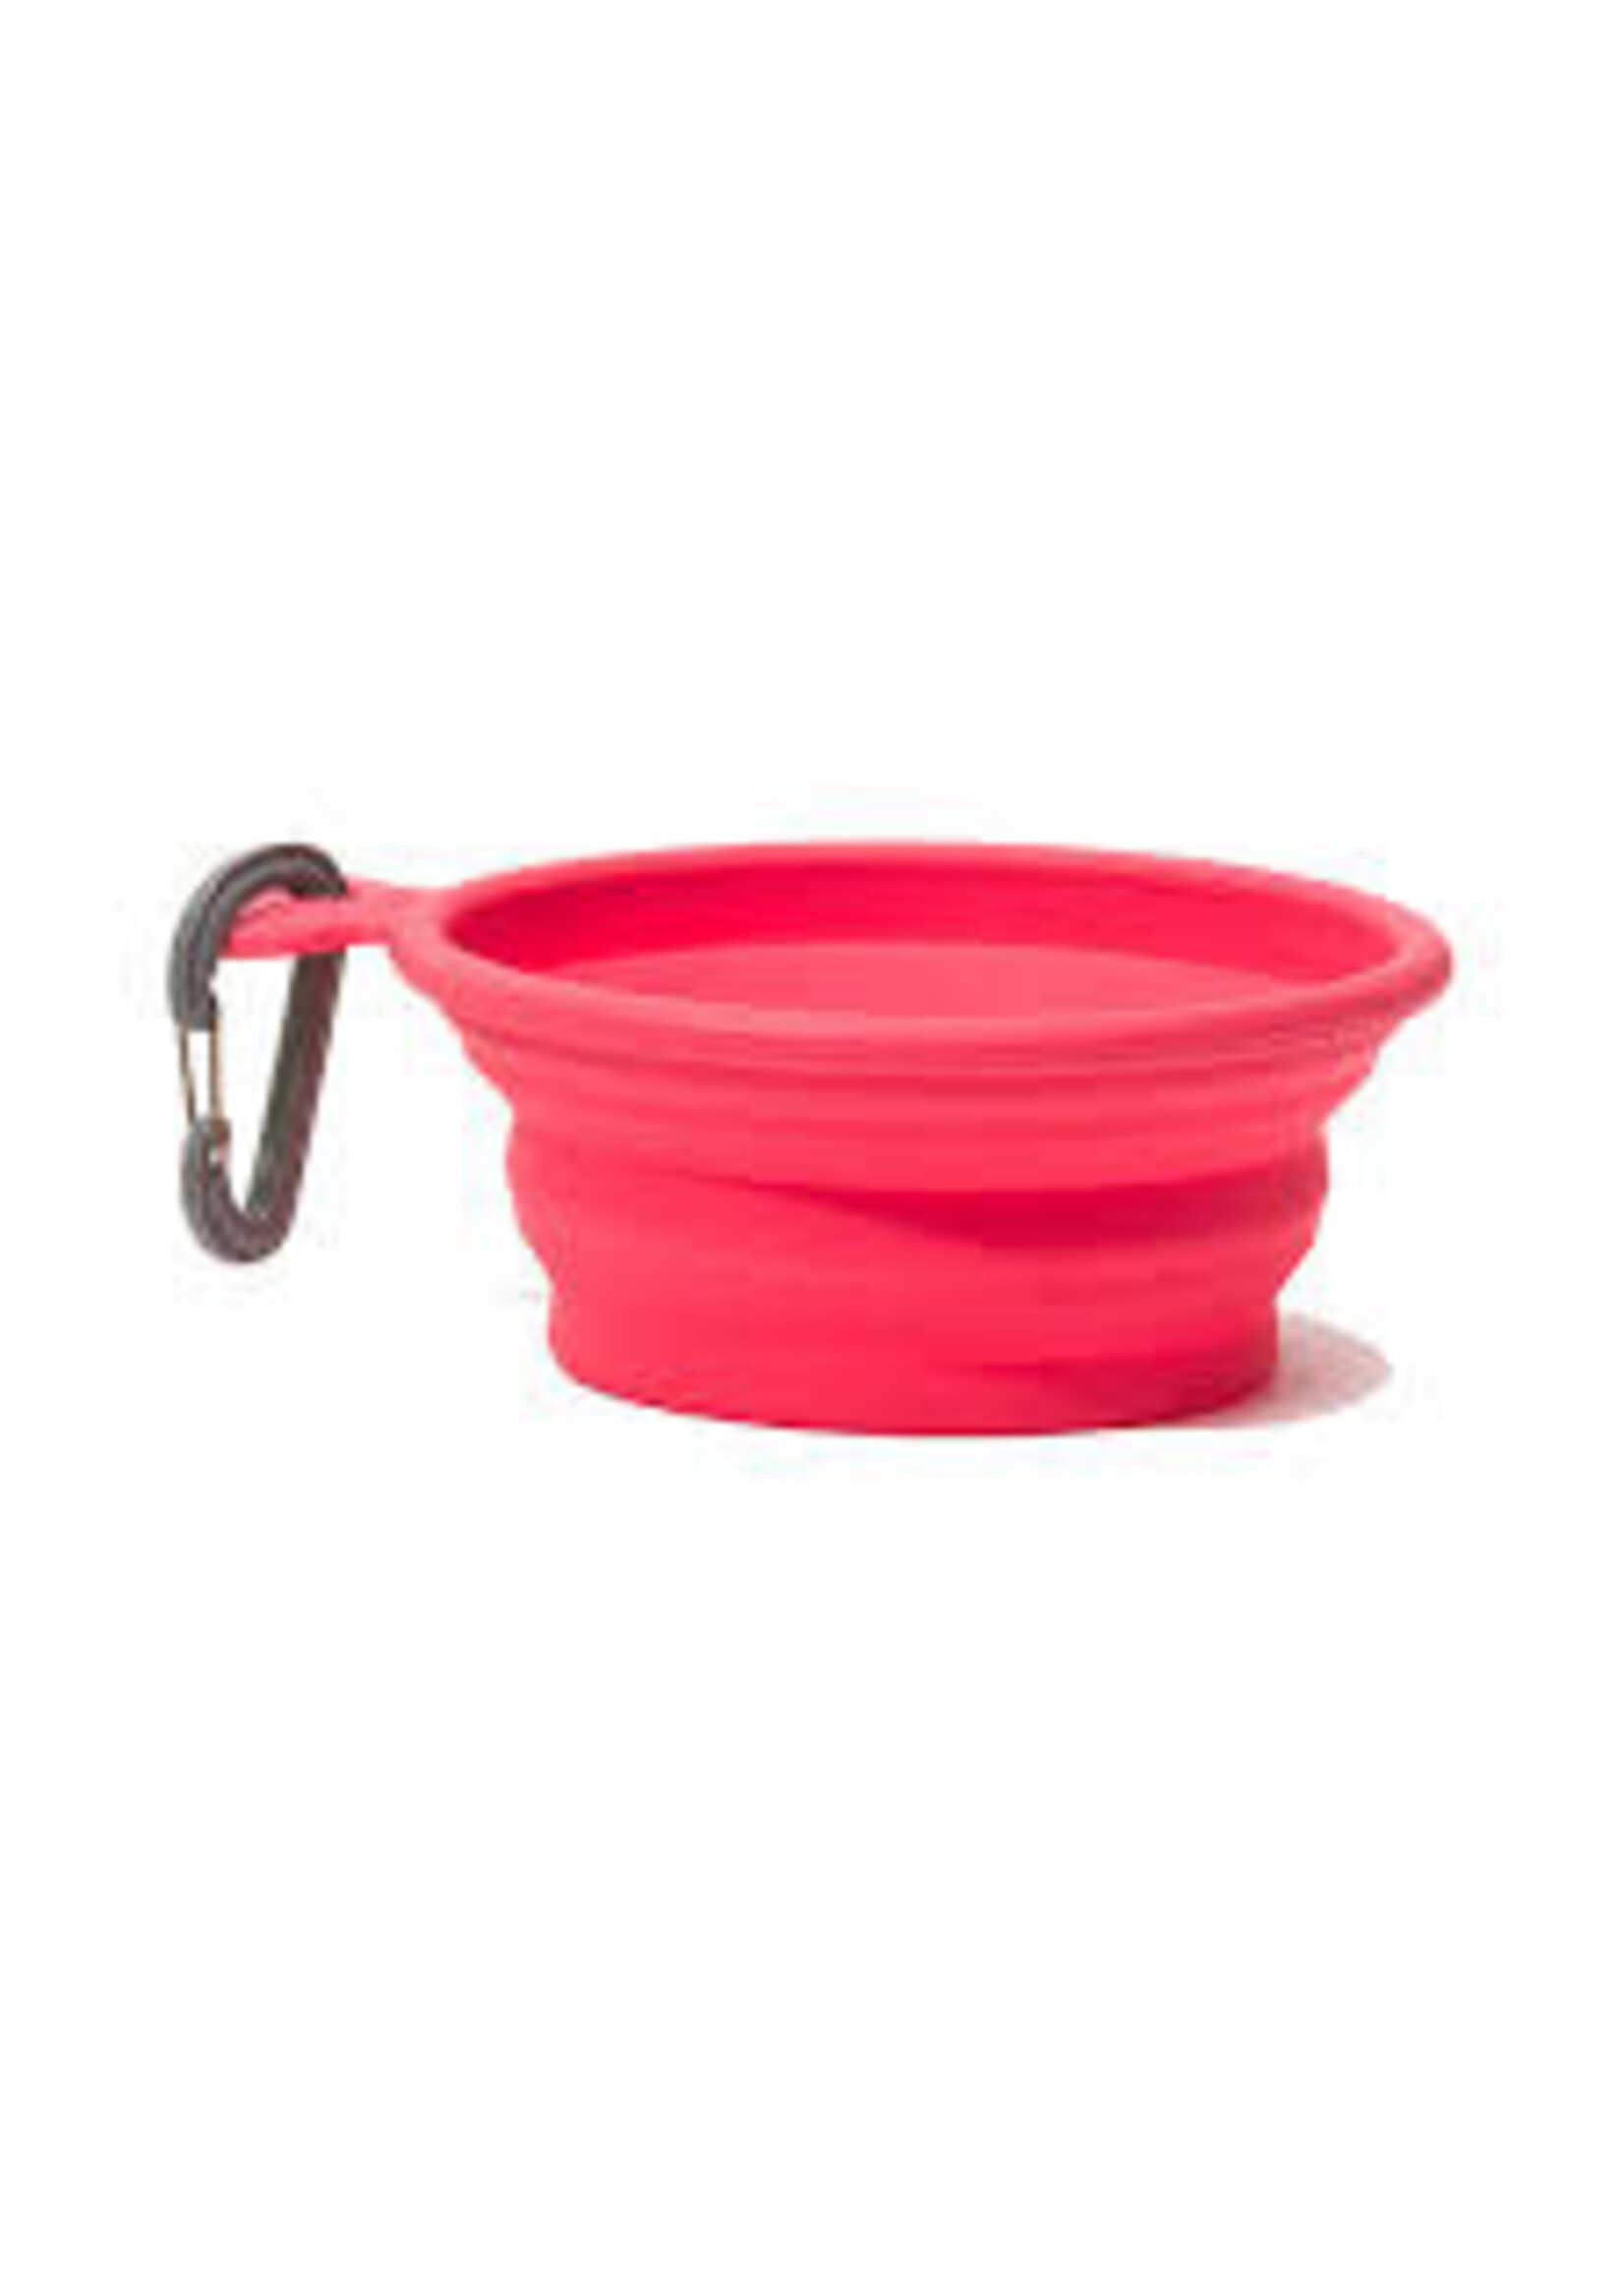 Messy Mutts Messy Mutts Collapsible Bowl